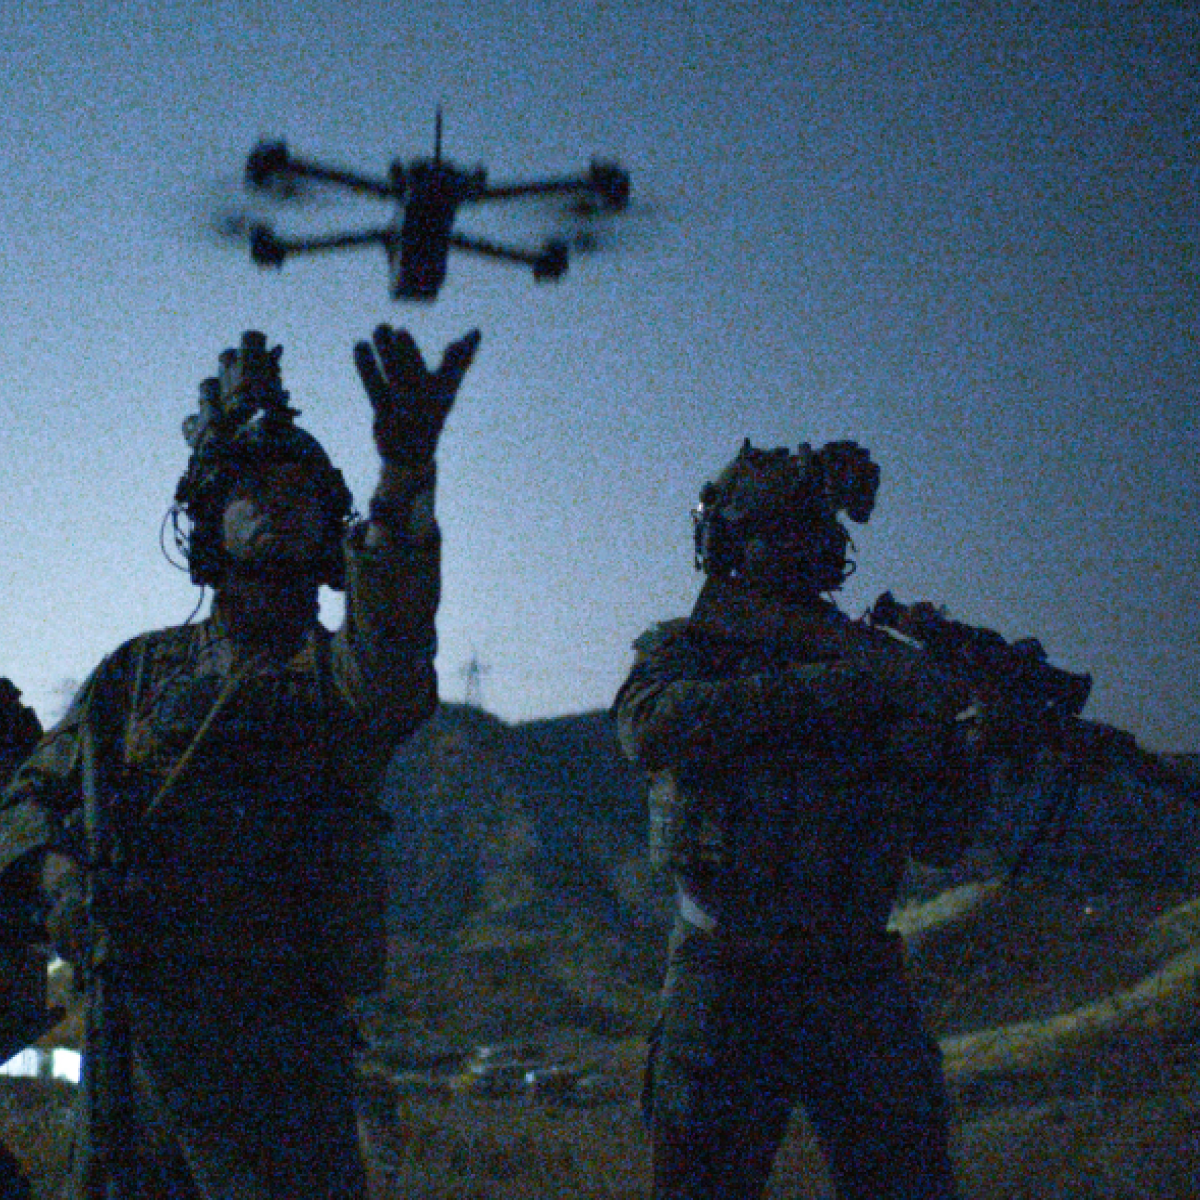 Soldier flying a Skydio ISR drone at night